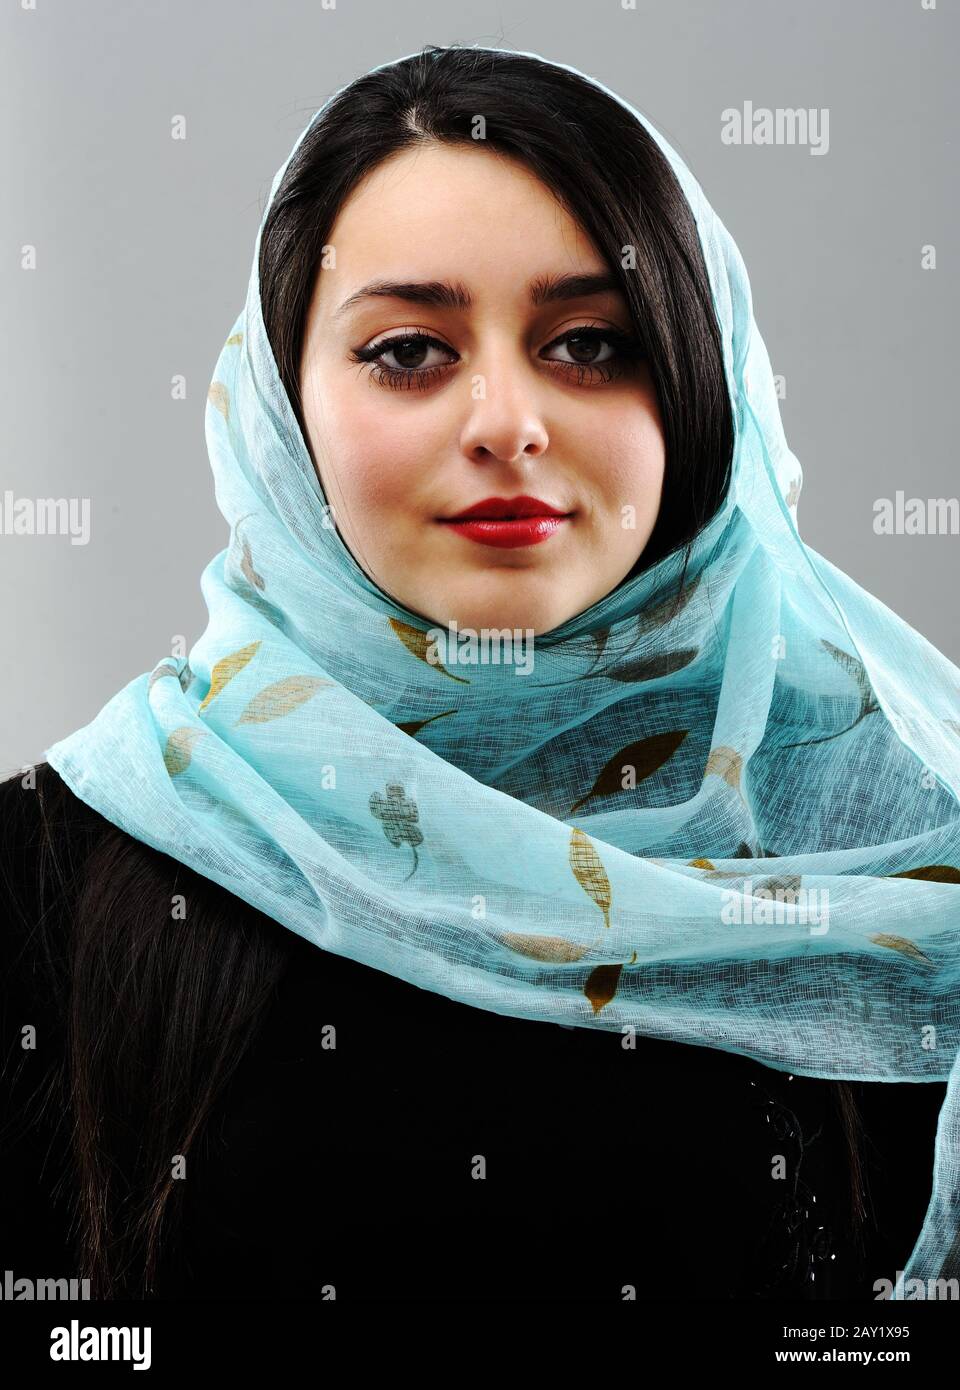 Middle eastern woman portrait Stock Photo